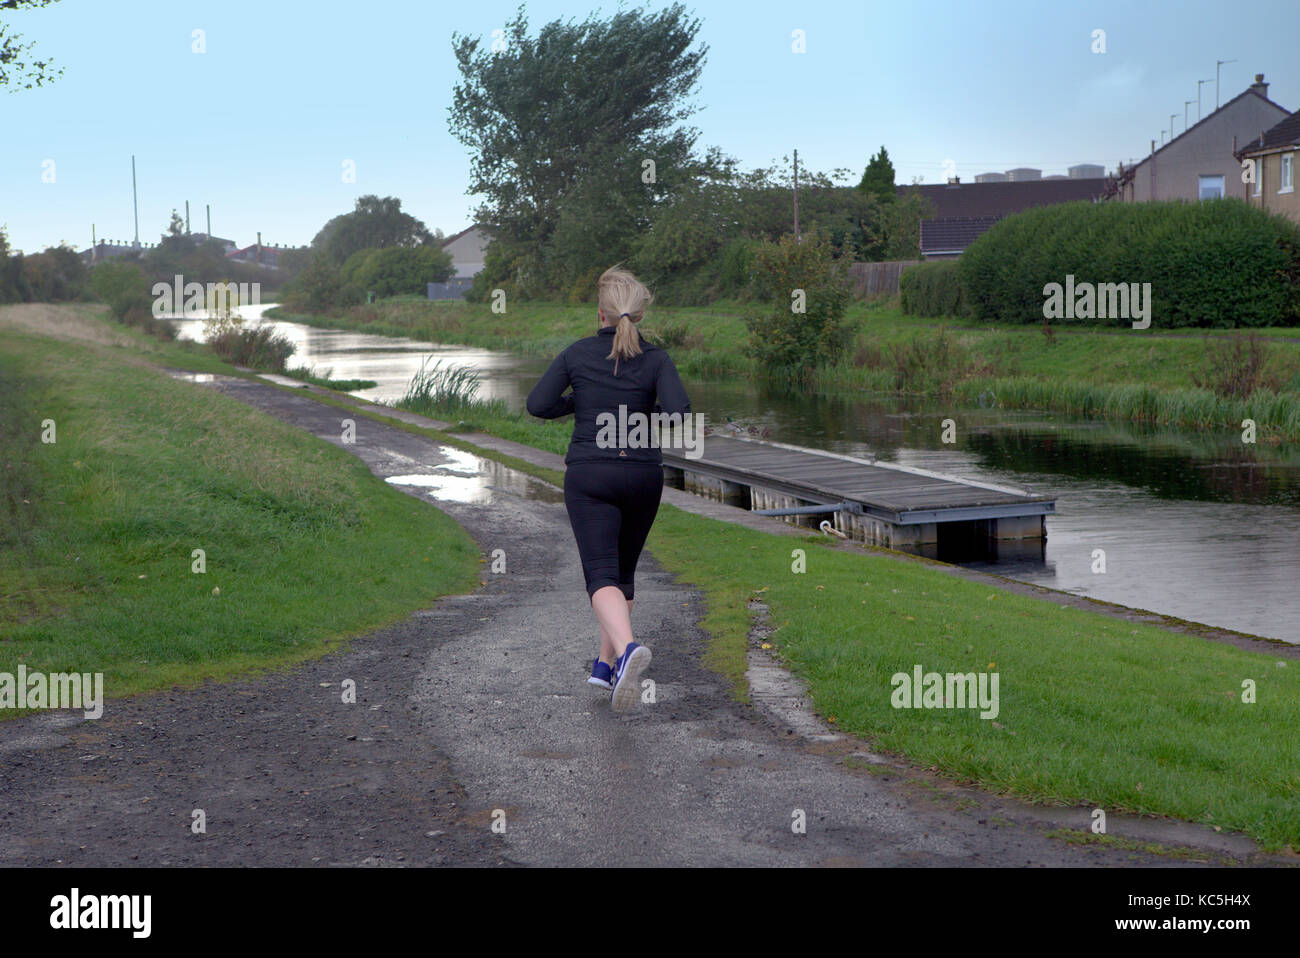 solo female woman runner jogger running Forth and Clyde Canal blonde Caucasian Stock Photo